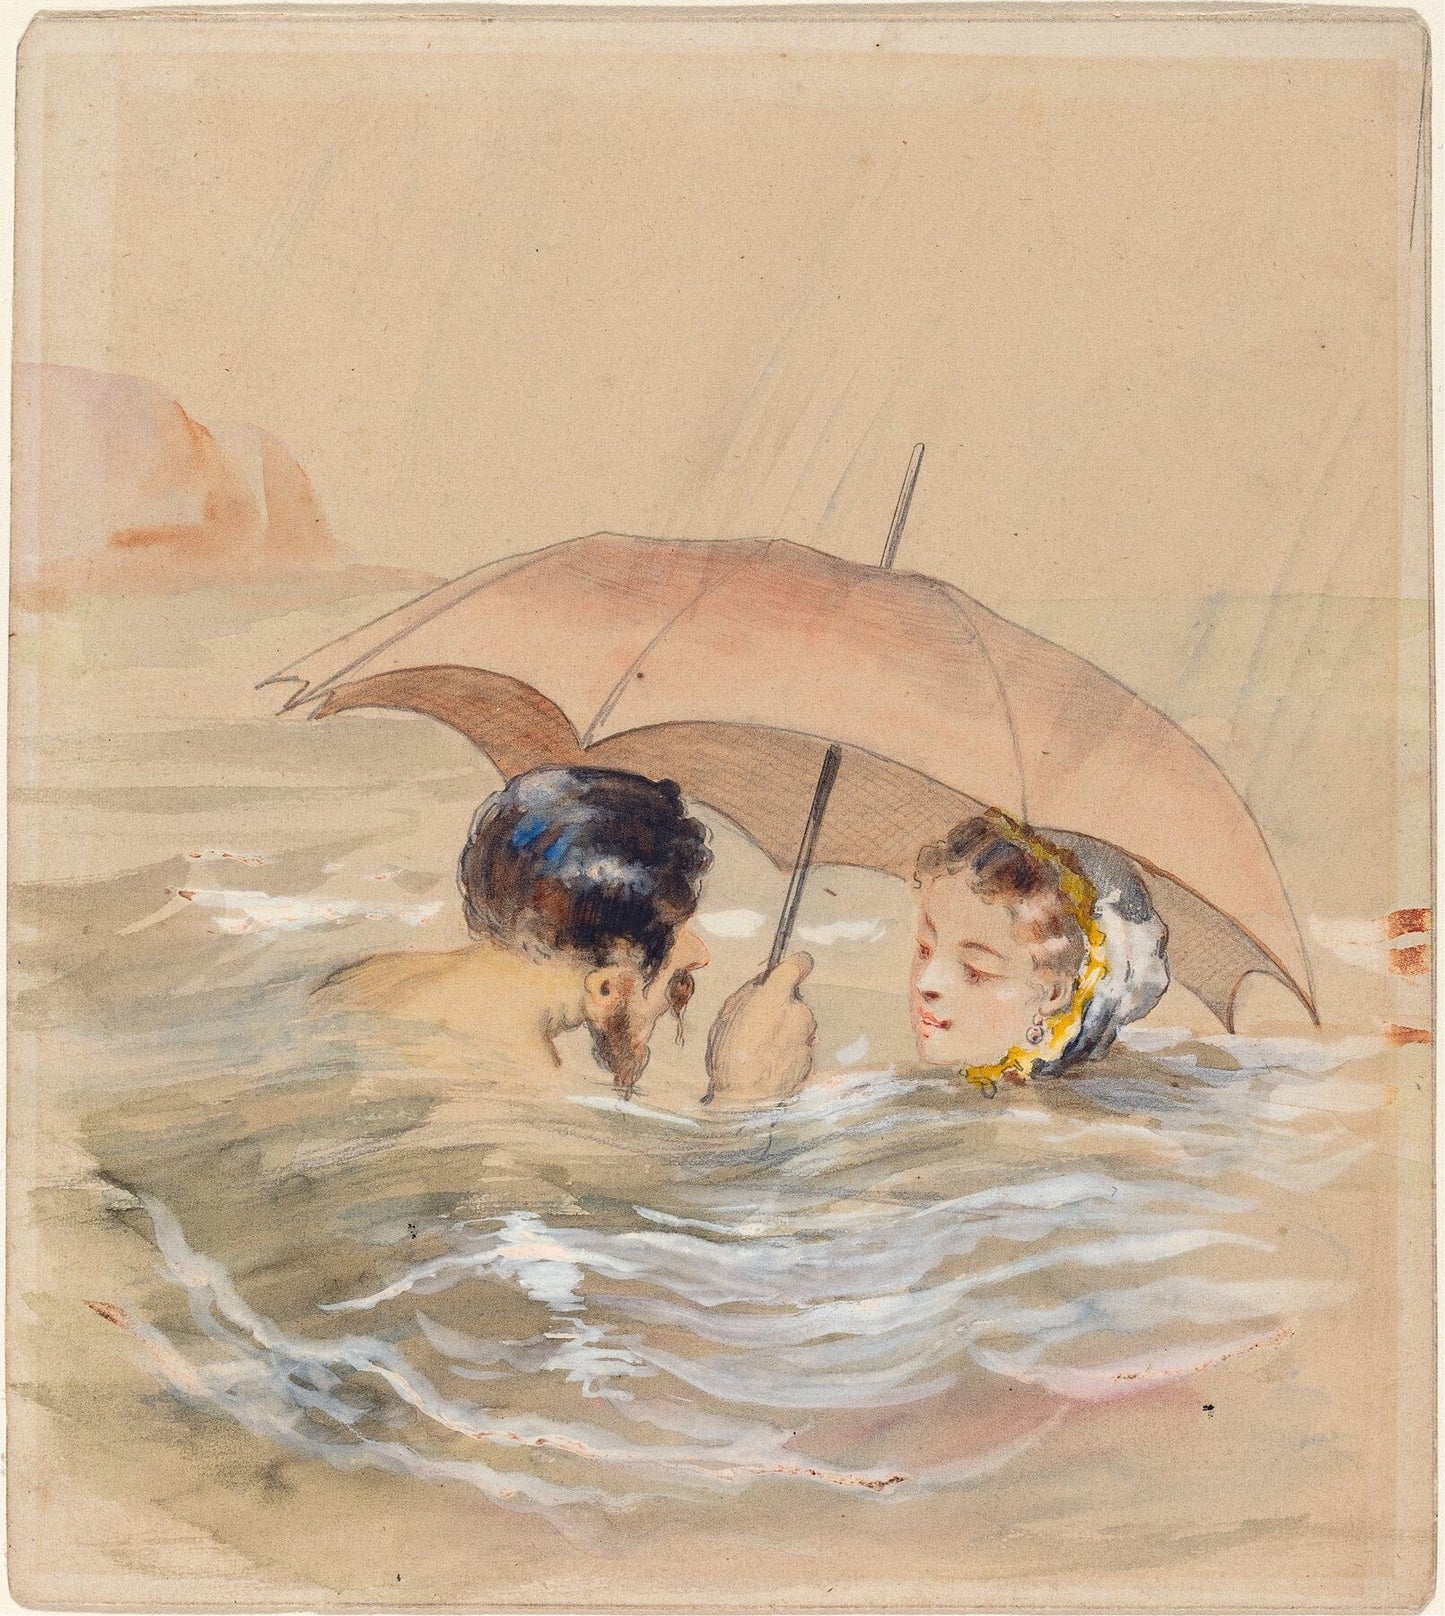 Bathing couple with umbrella (1800s) | Bathroom artwork prints | Alfred Grevin Posters, Prints, & Visual Artwork The Trumpet Shop   